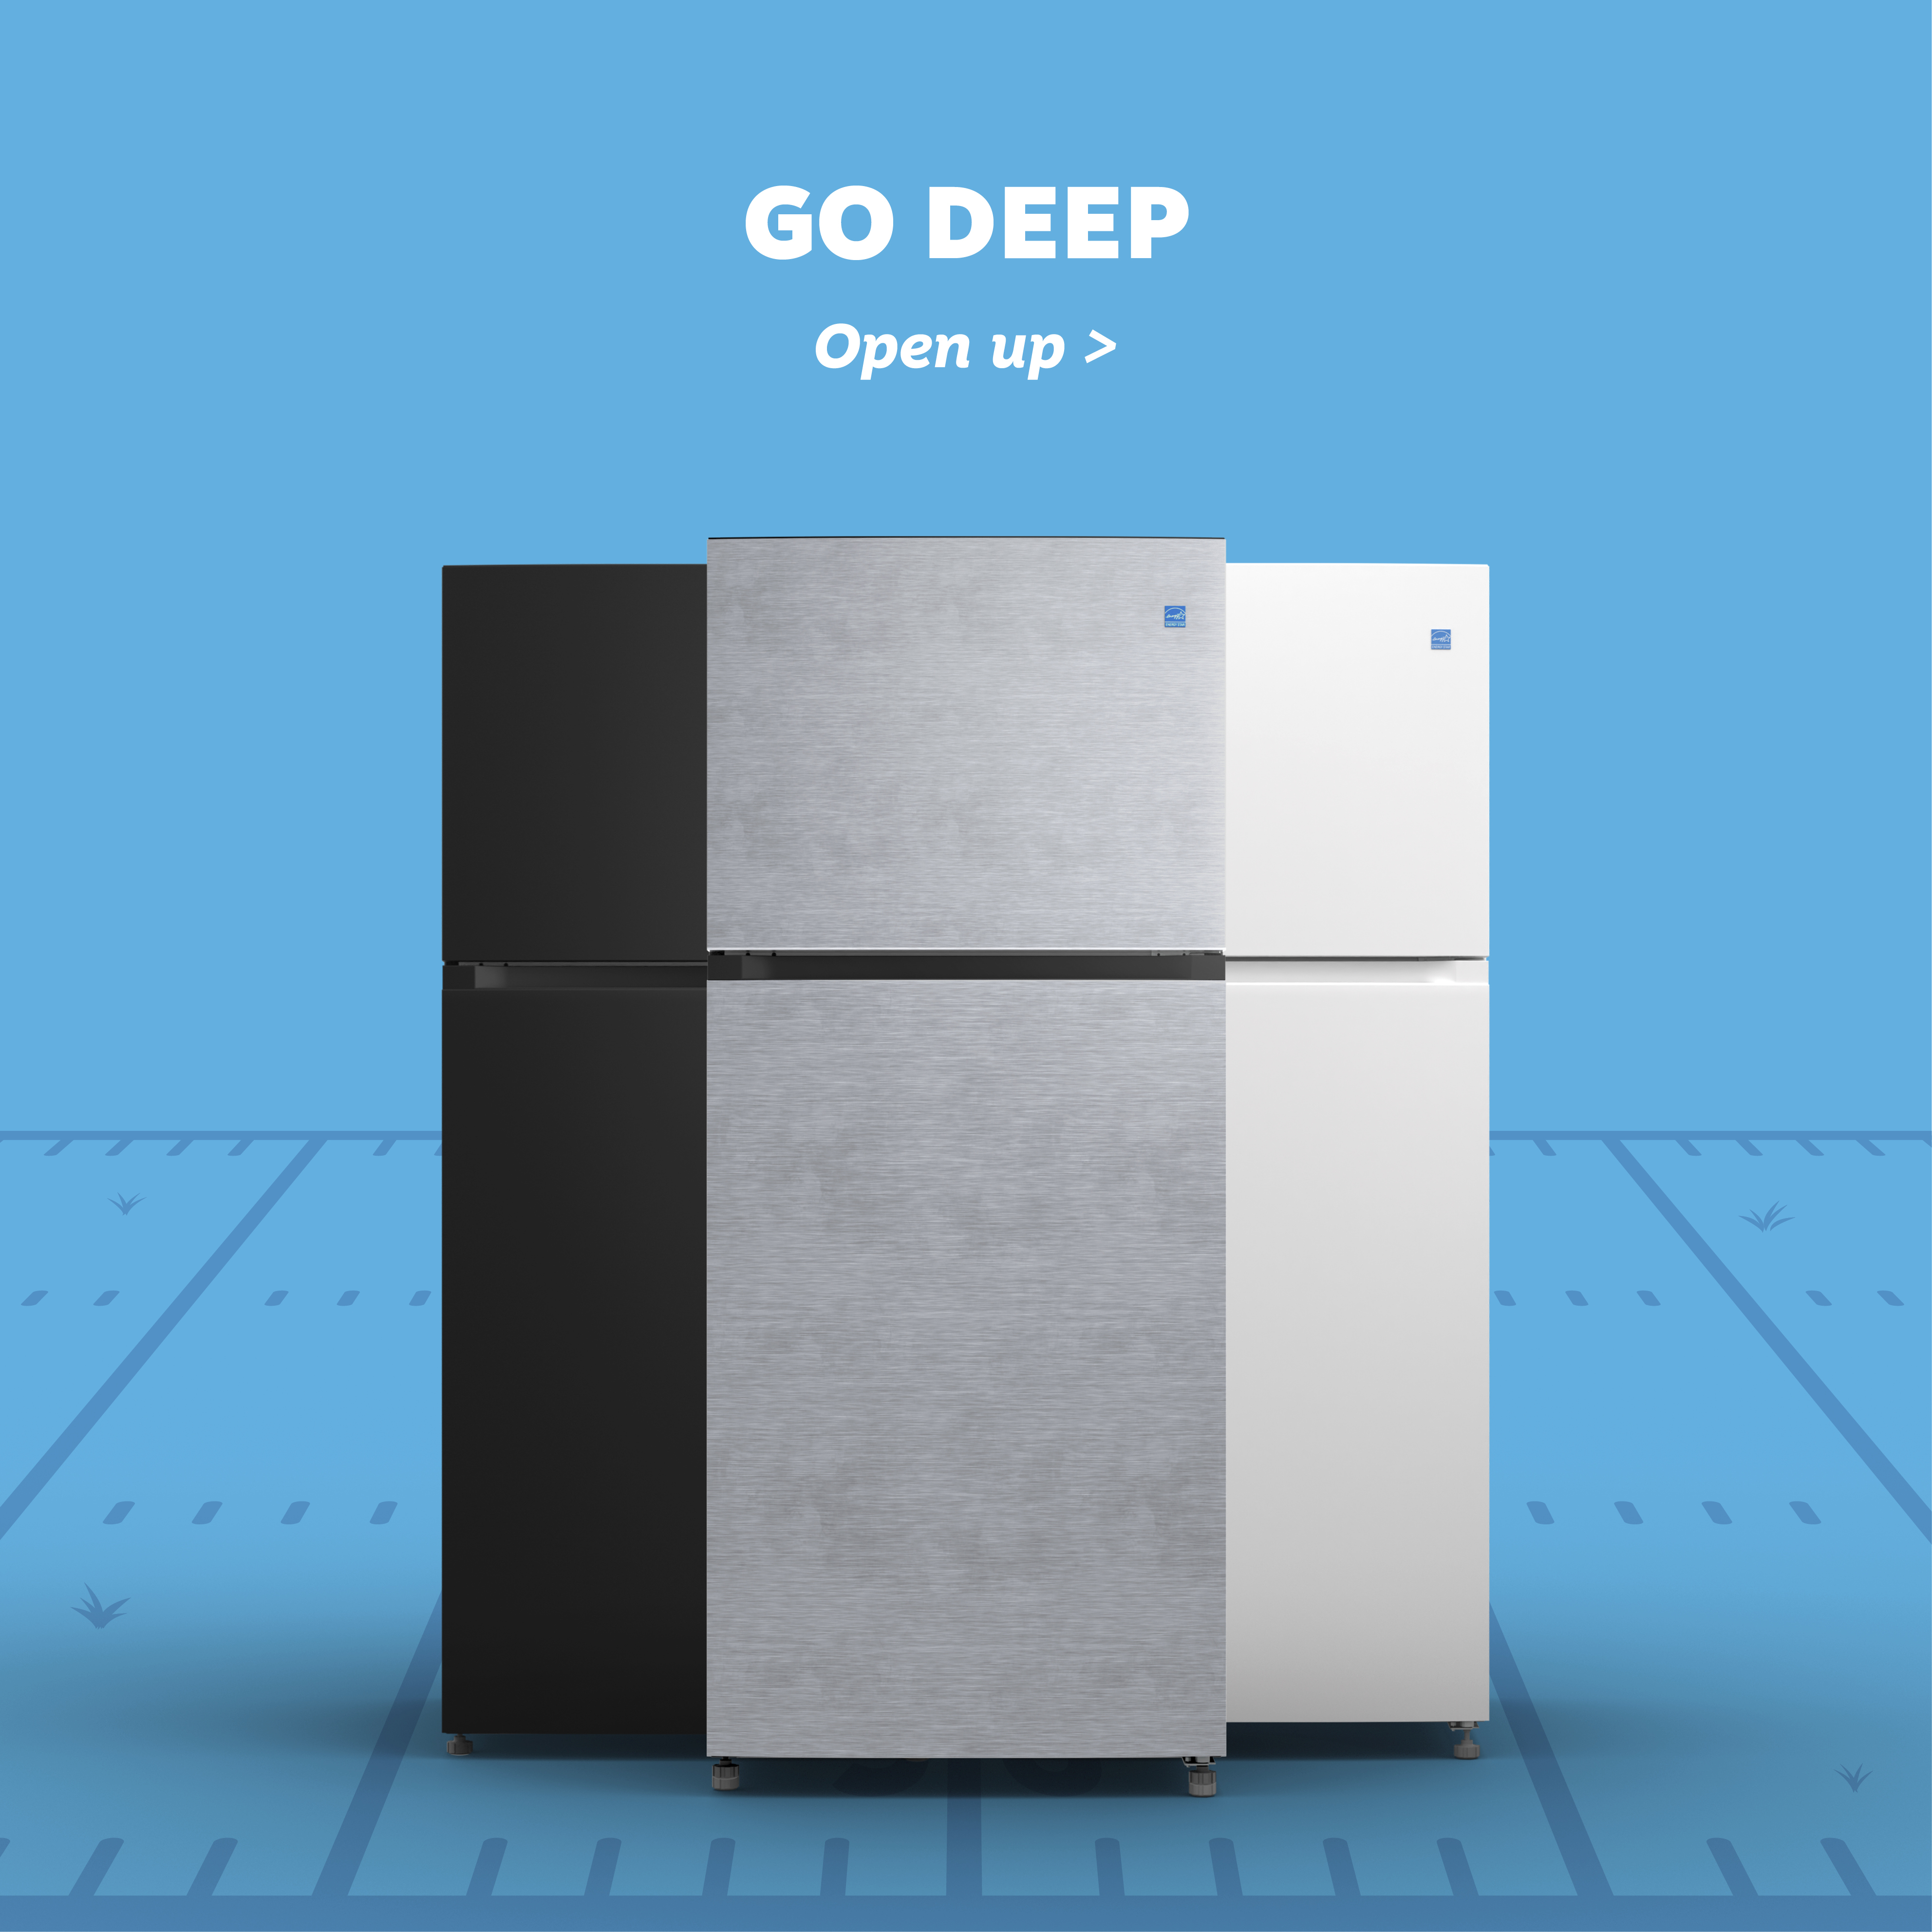 Image of various refrigerators with text "Go Deep."